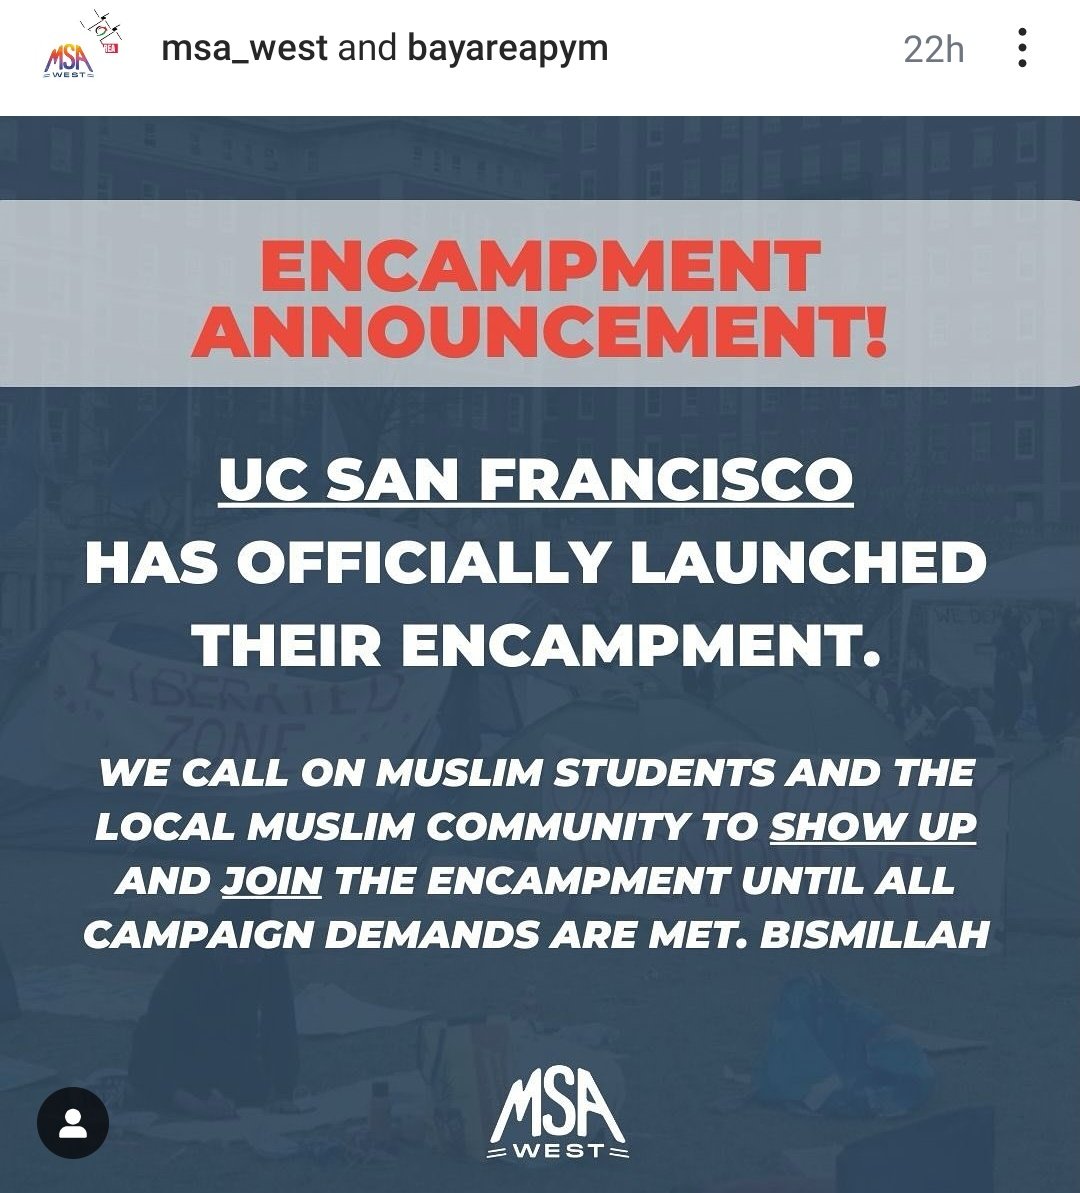 UC San Francisco has started their student encampment!!